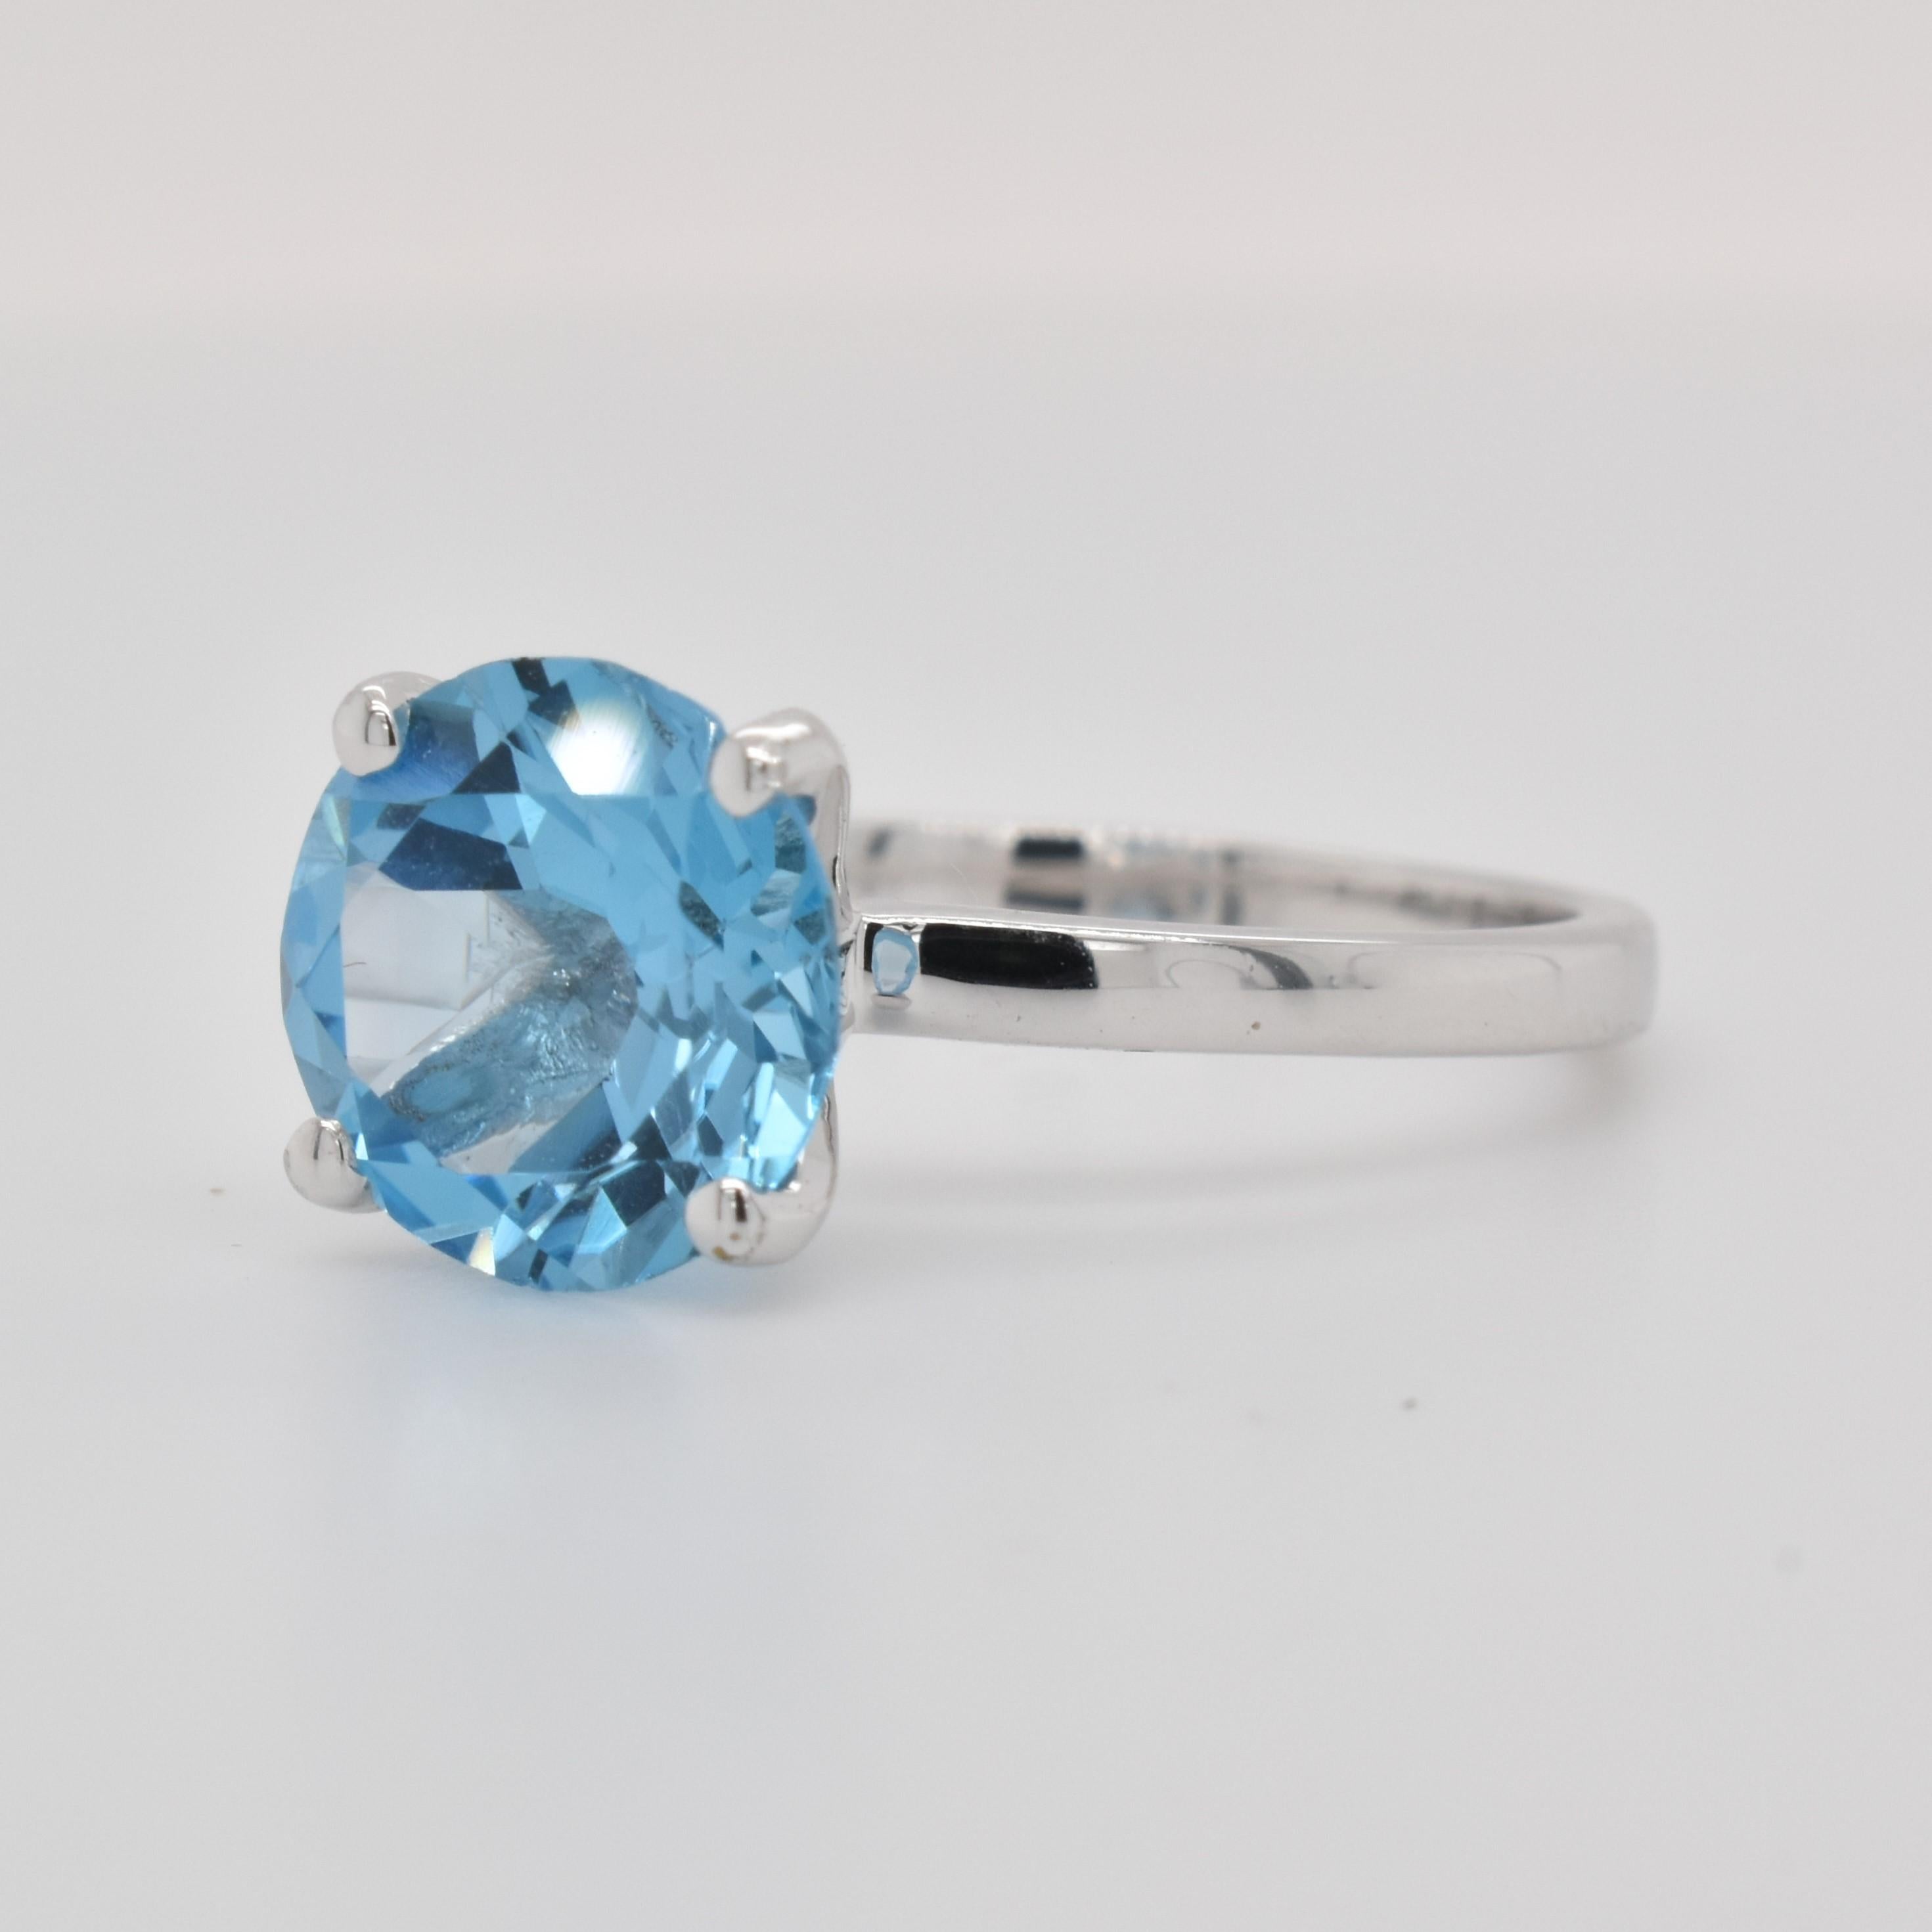 Round Shape Swiss Blue Topaz Gemstone beautifully crafted in a Ring. A fiery Blue color December Birthstone. For a special occasion like Engagement or Proposal or may be as a gift for a special person.

Primary Stone Size - 9x9mm